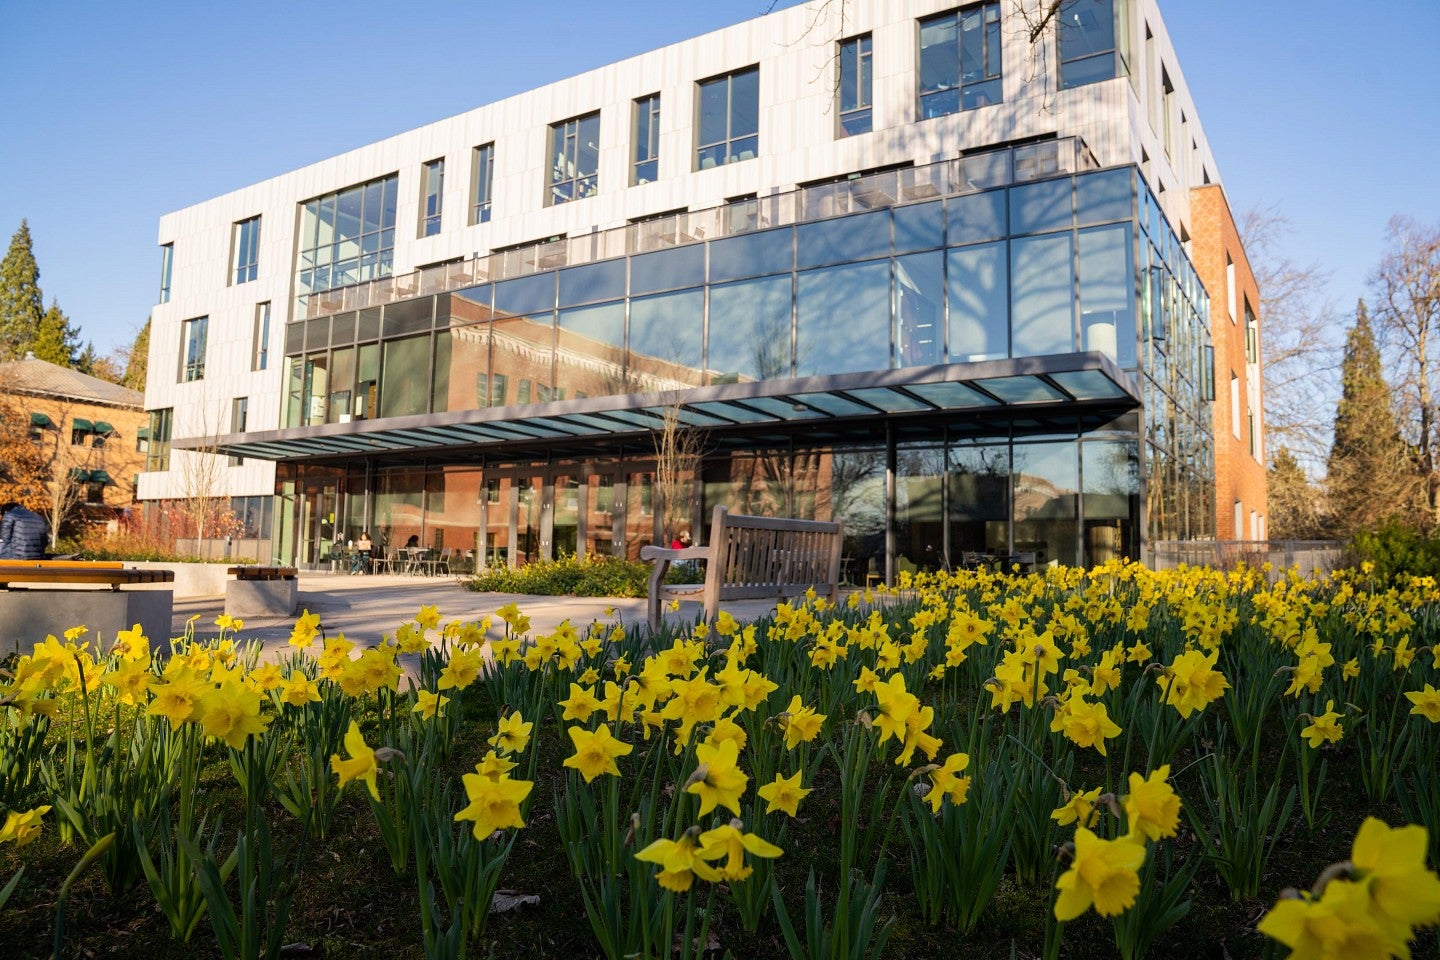 Tykeson hall with daffodils in foreground.